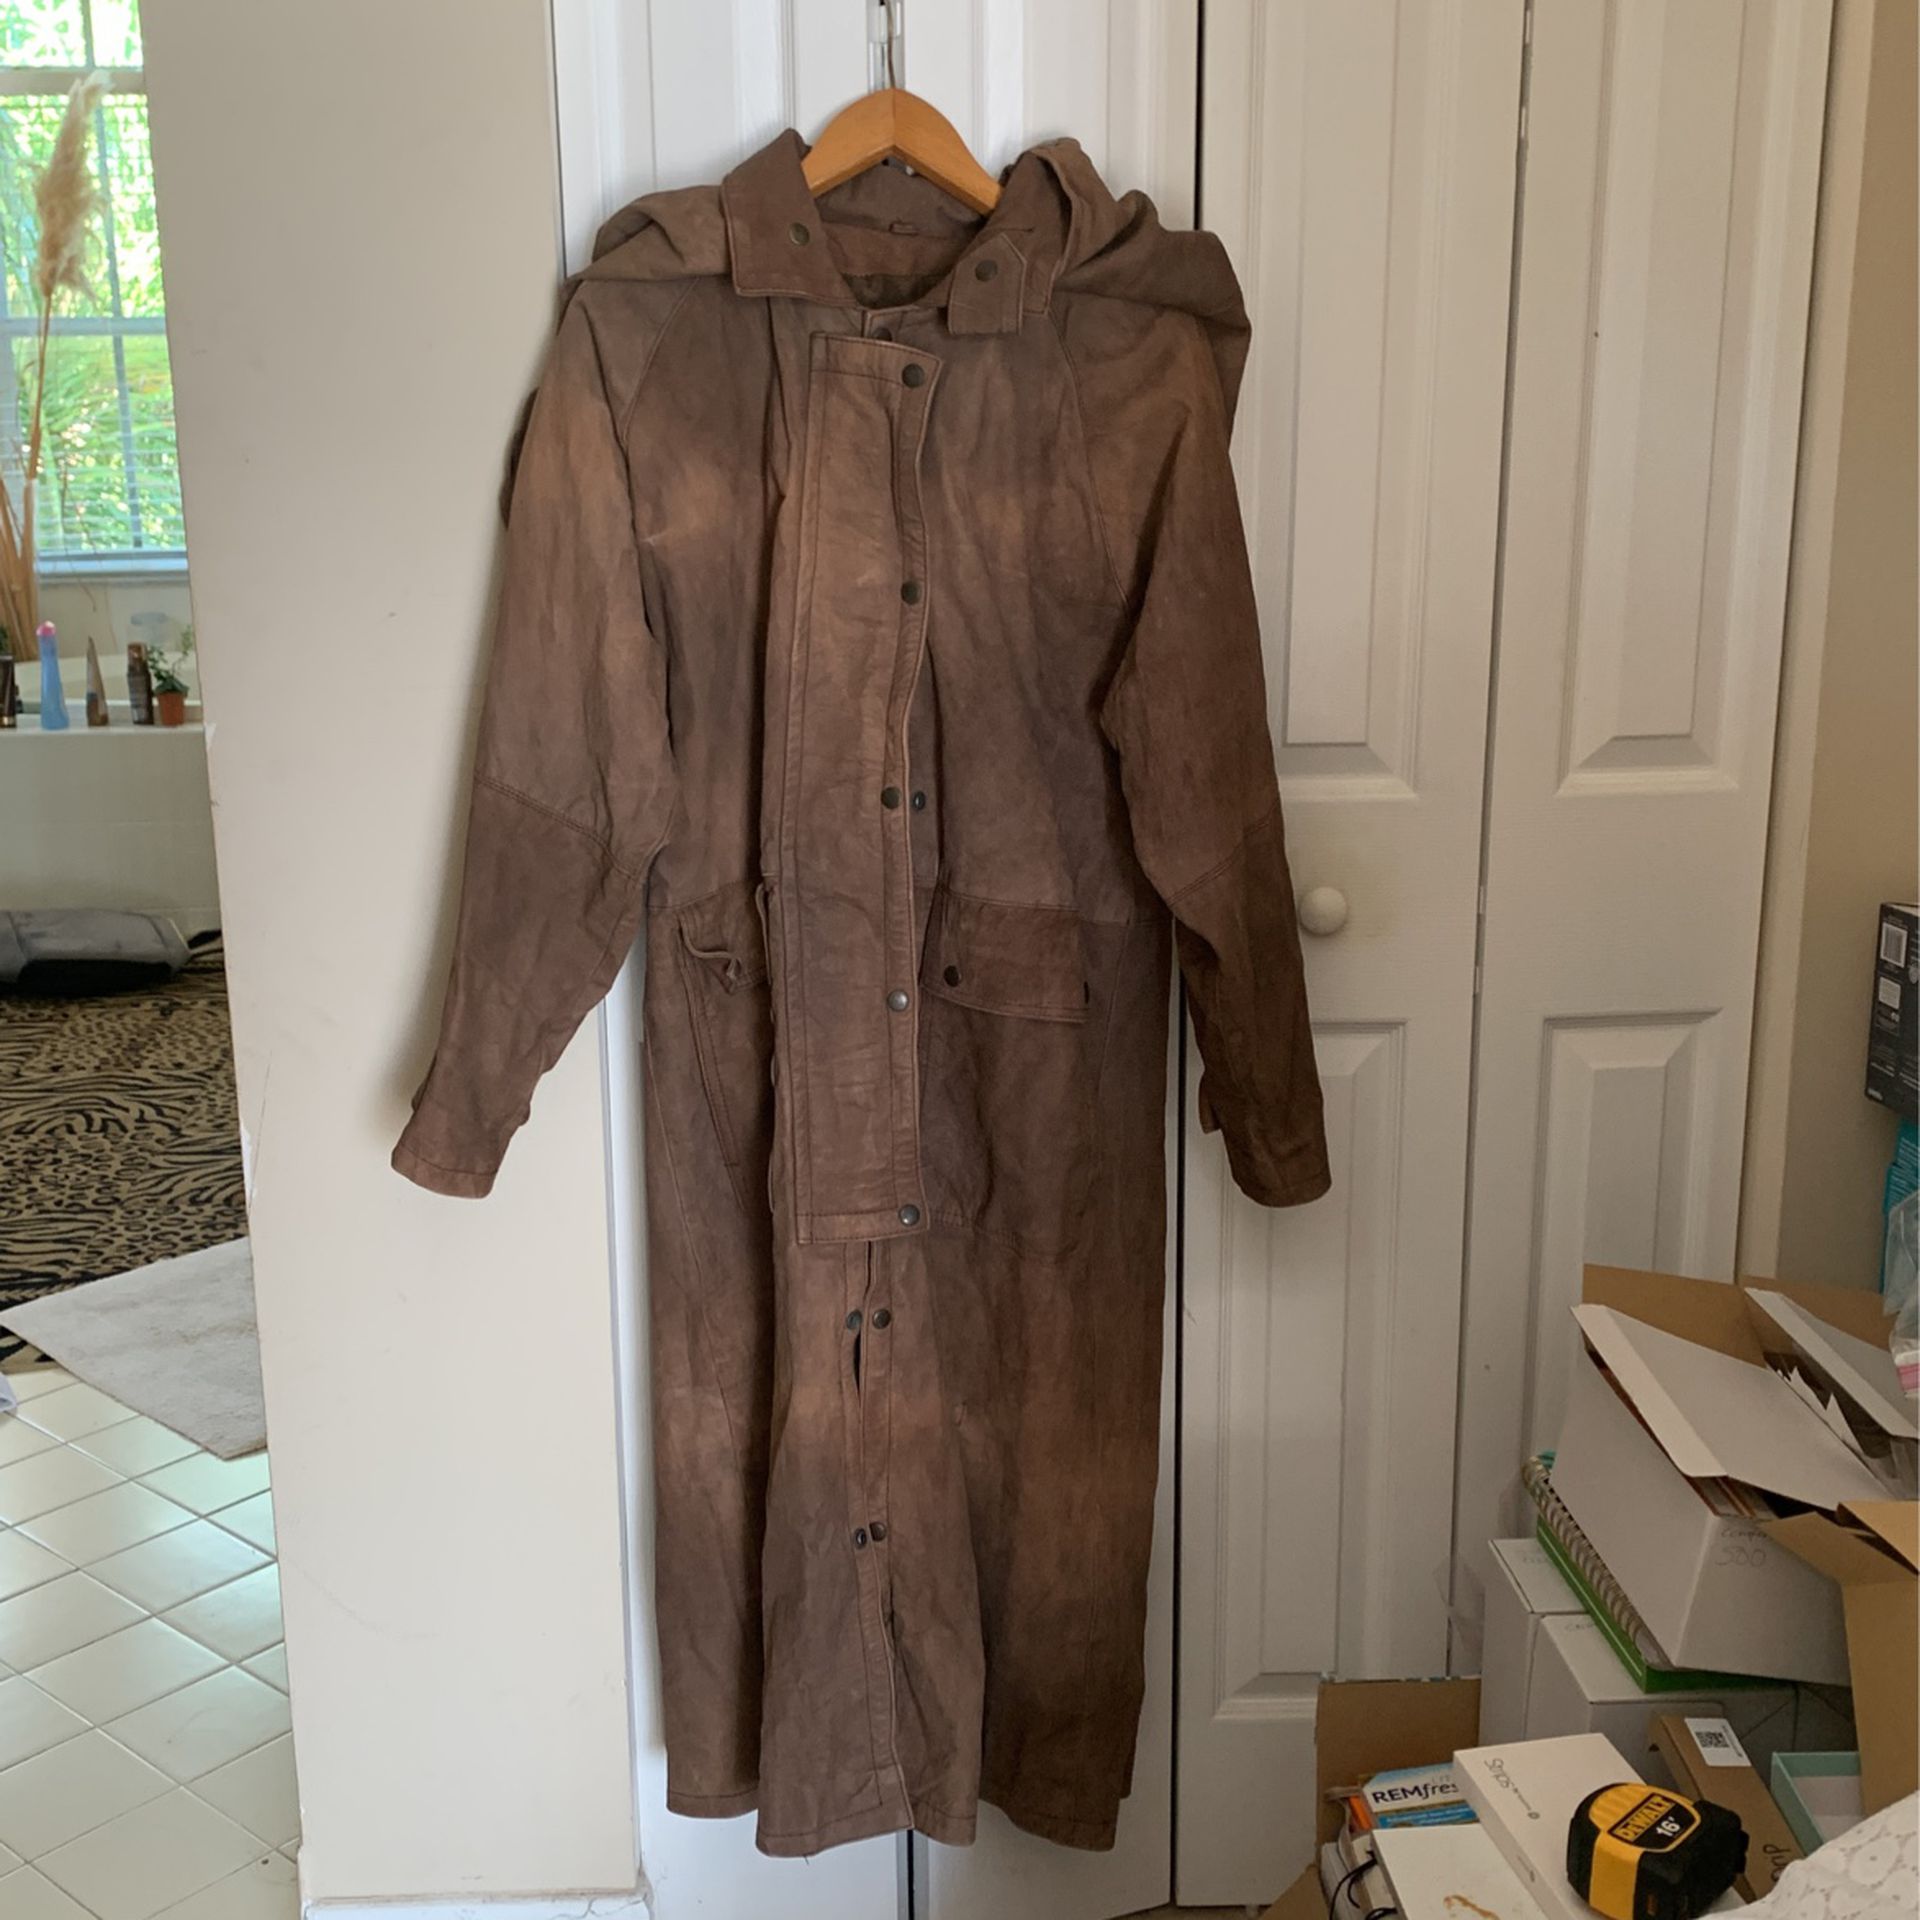 Gorgeous Brown Leather Long Coat, Snap Off Hood